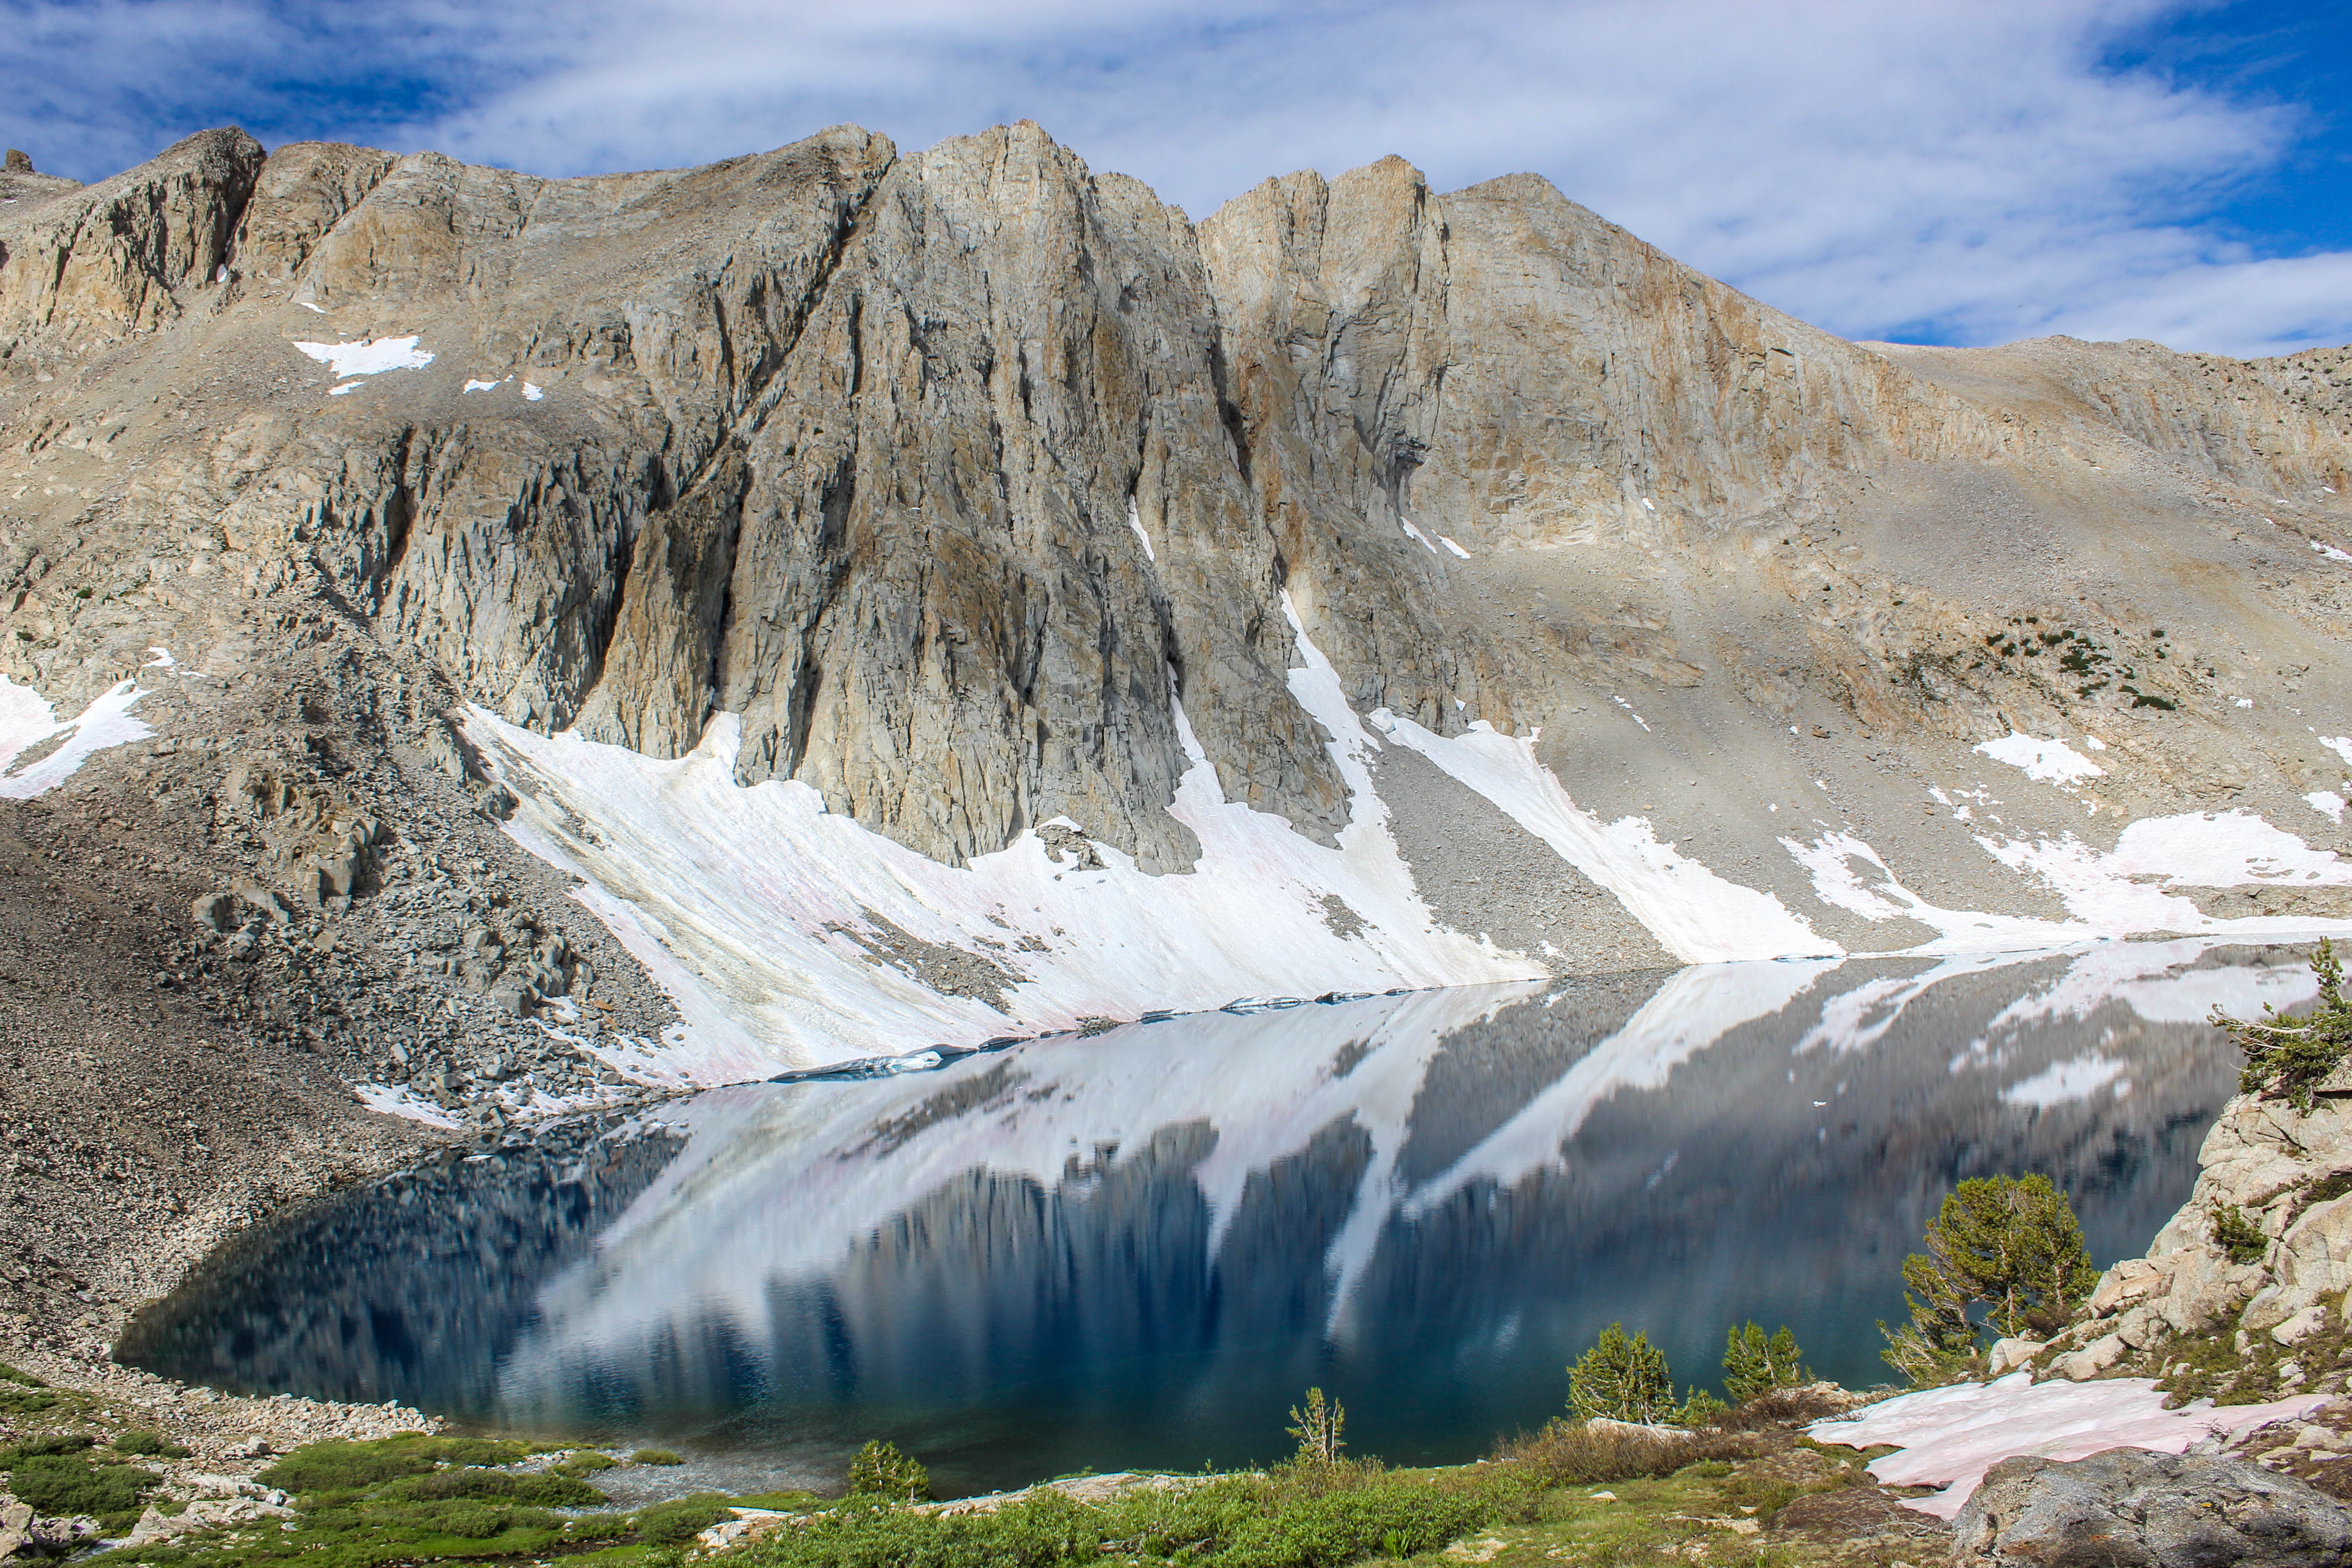 An alpine lake perfectly mirrors the stark, stone-faced mountain above.